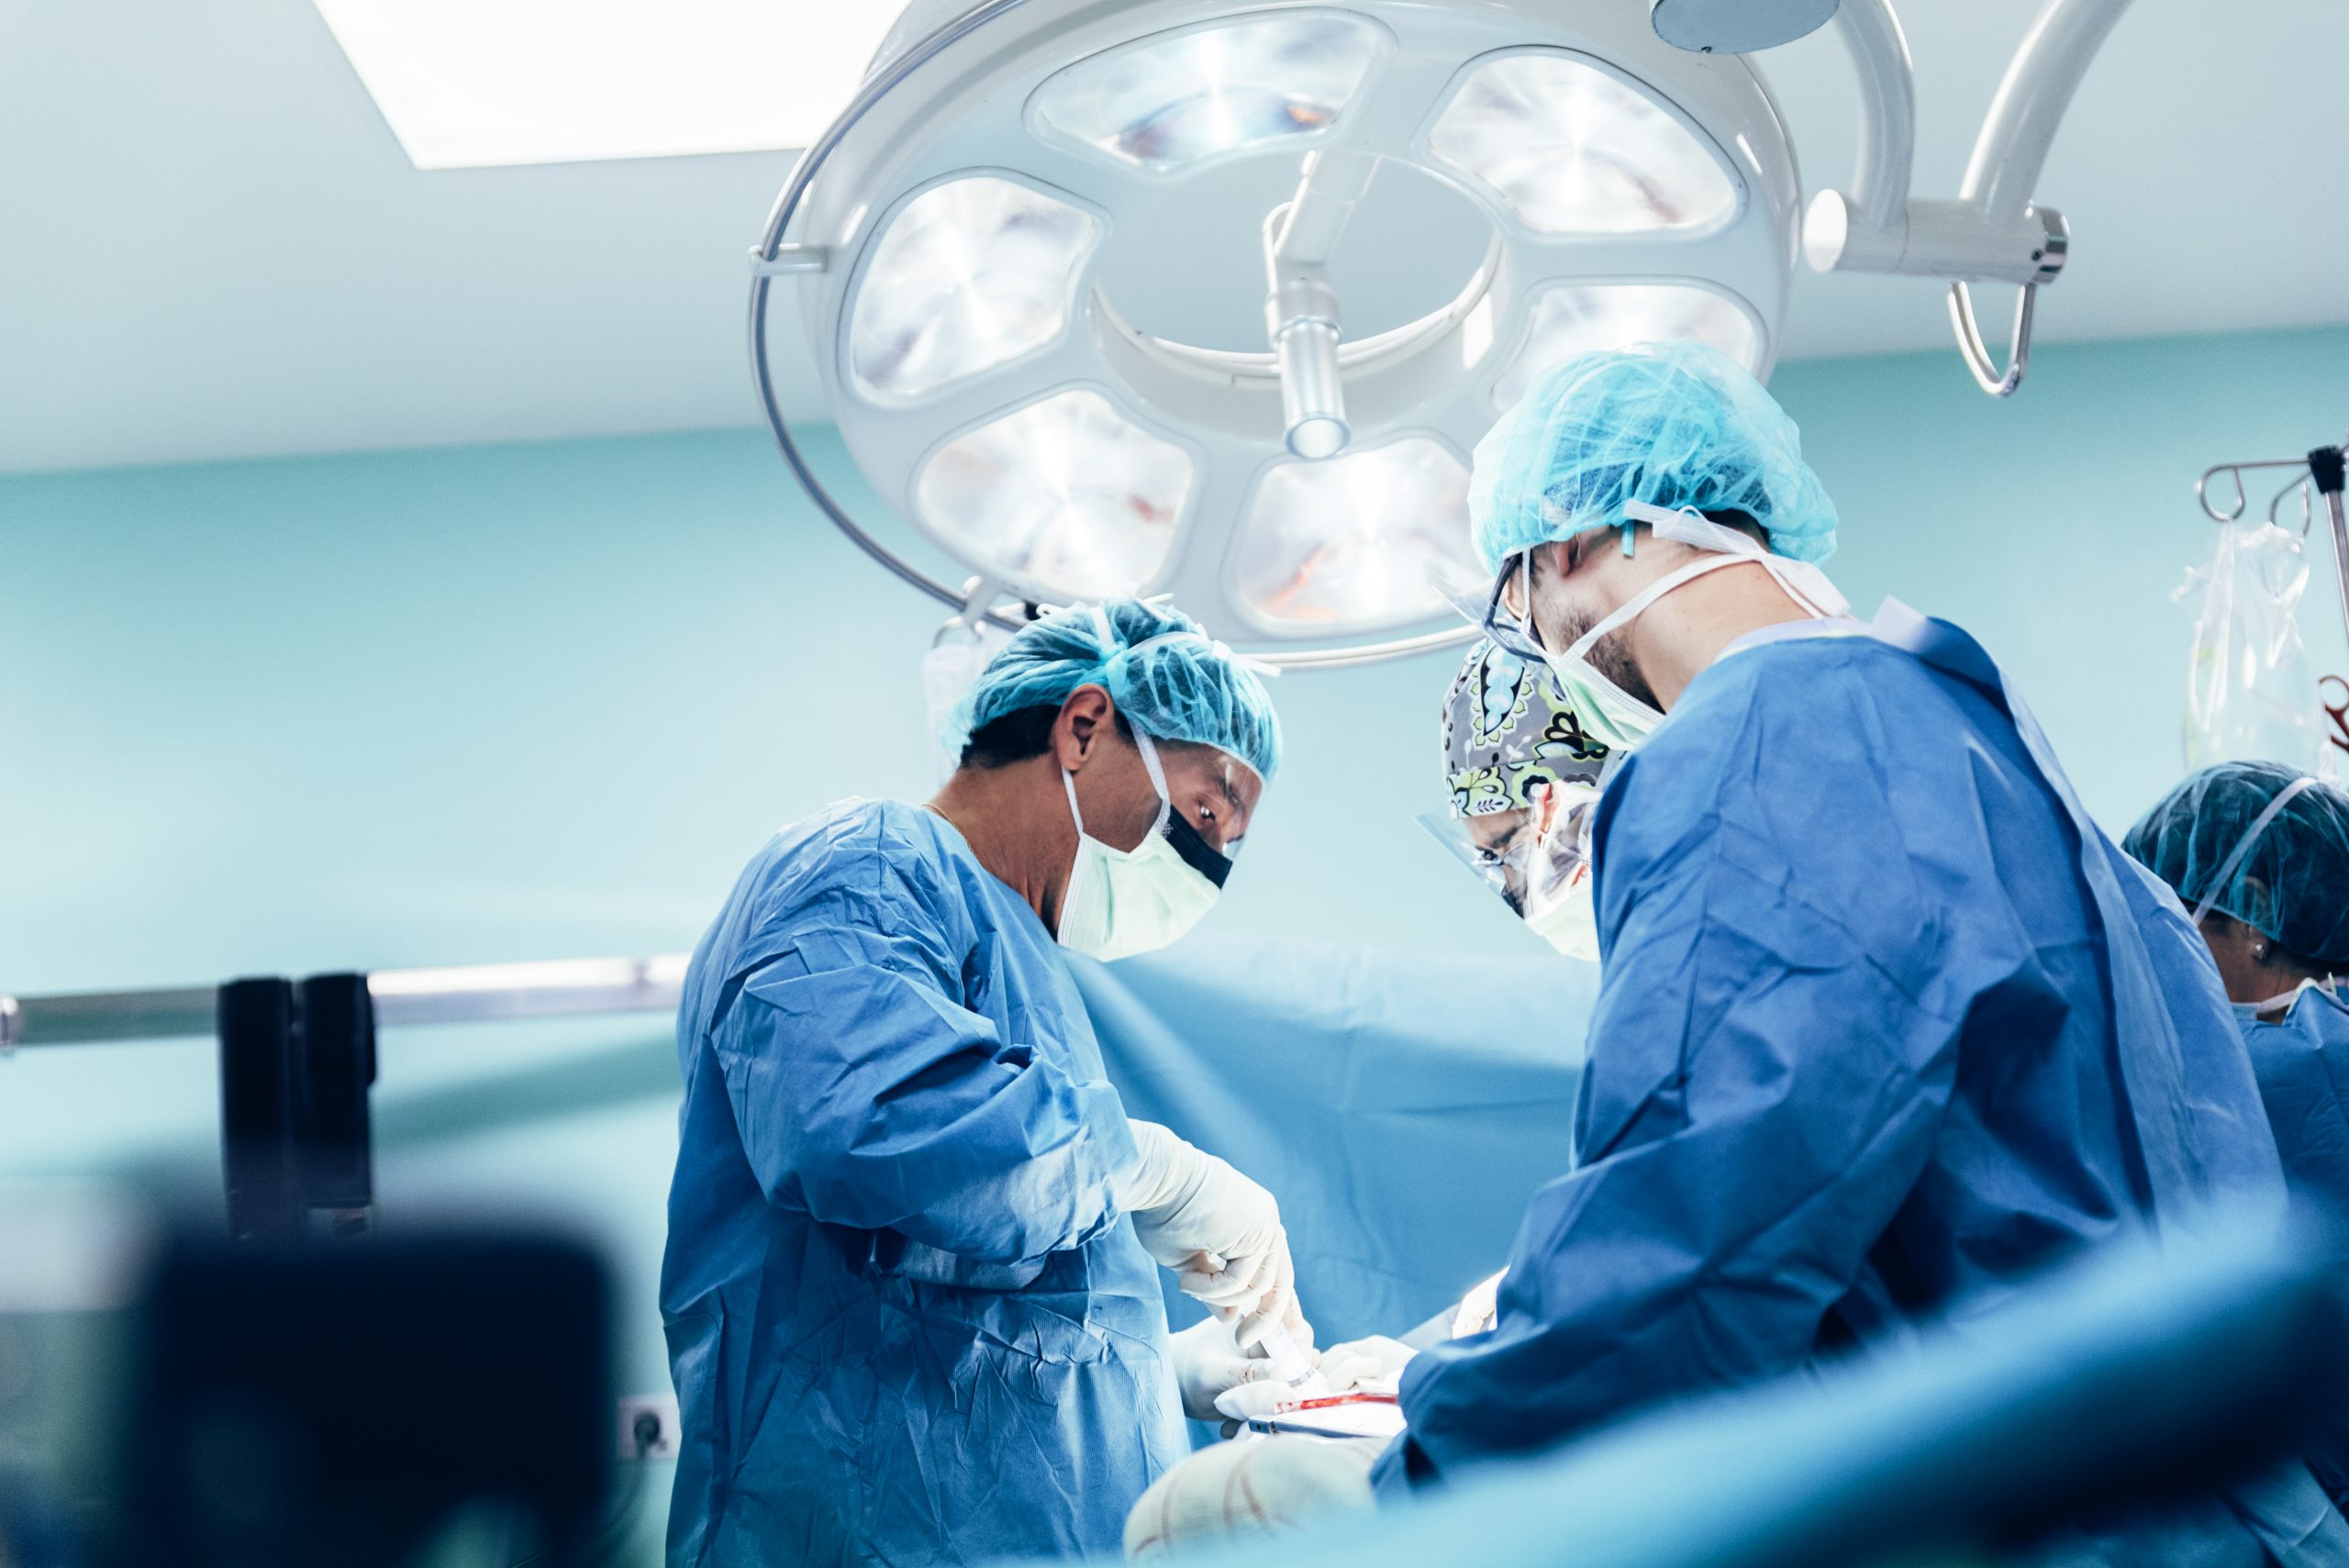 Reproductive surgery with a team of surgeons